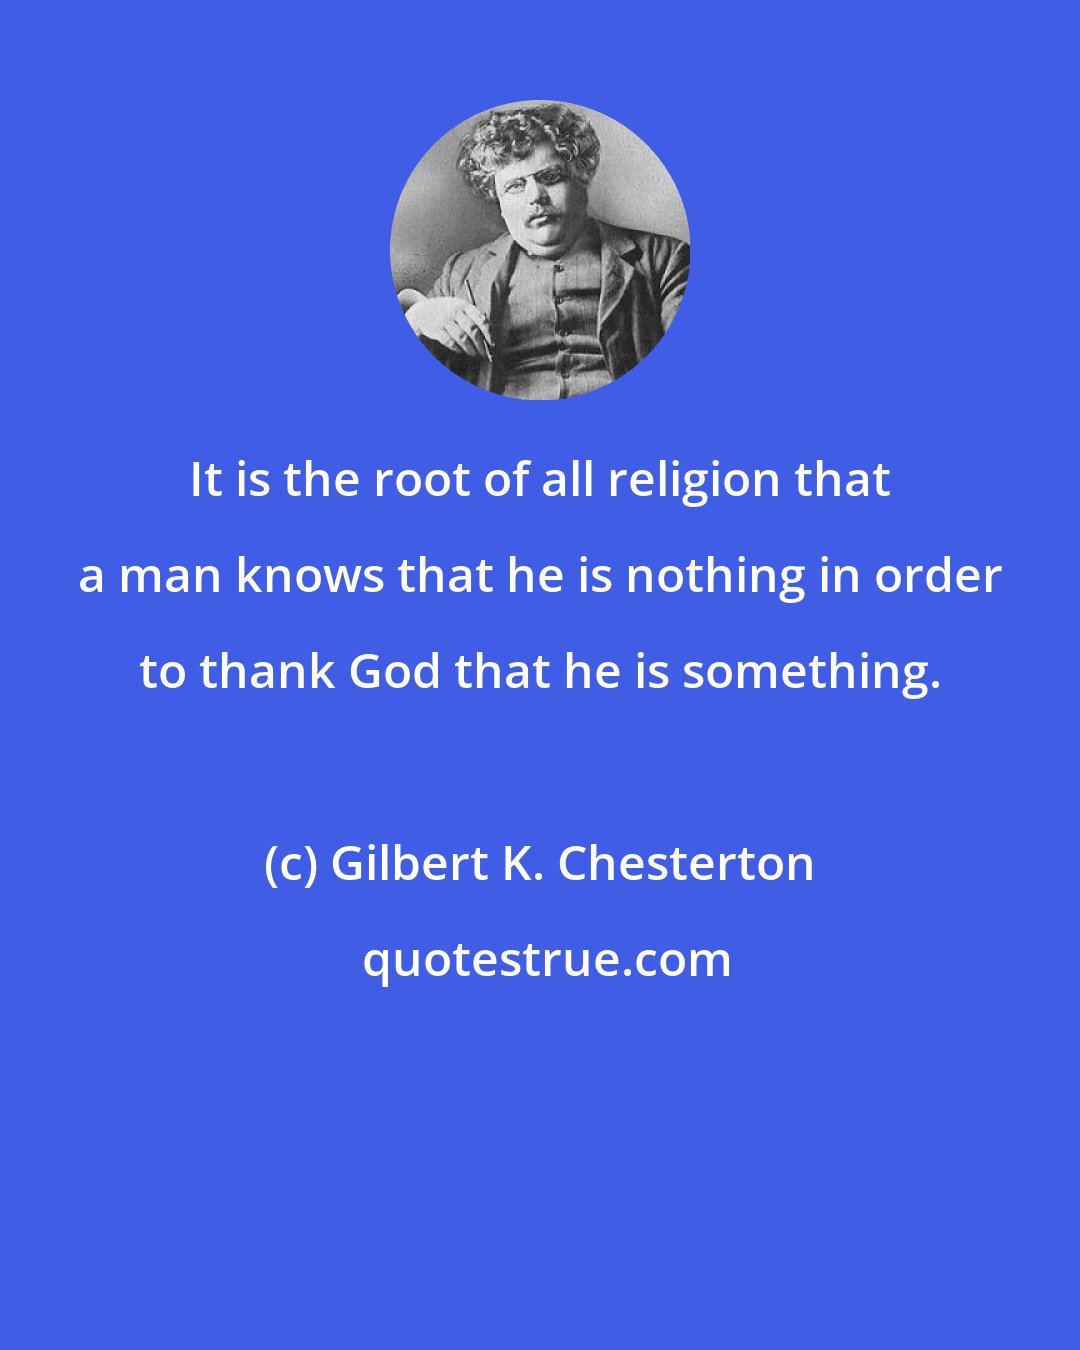 Gilbert K. Chesterton: It is the root of all religion that a man knows that he is nothing in order to thank God that he is something.